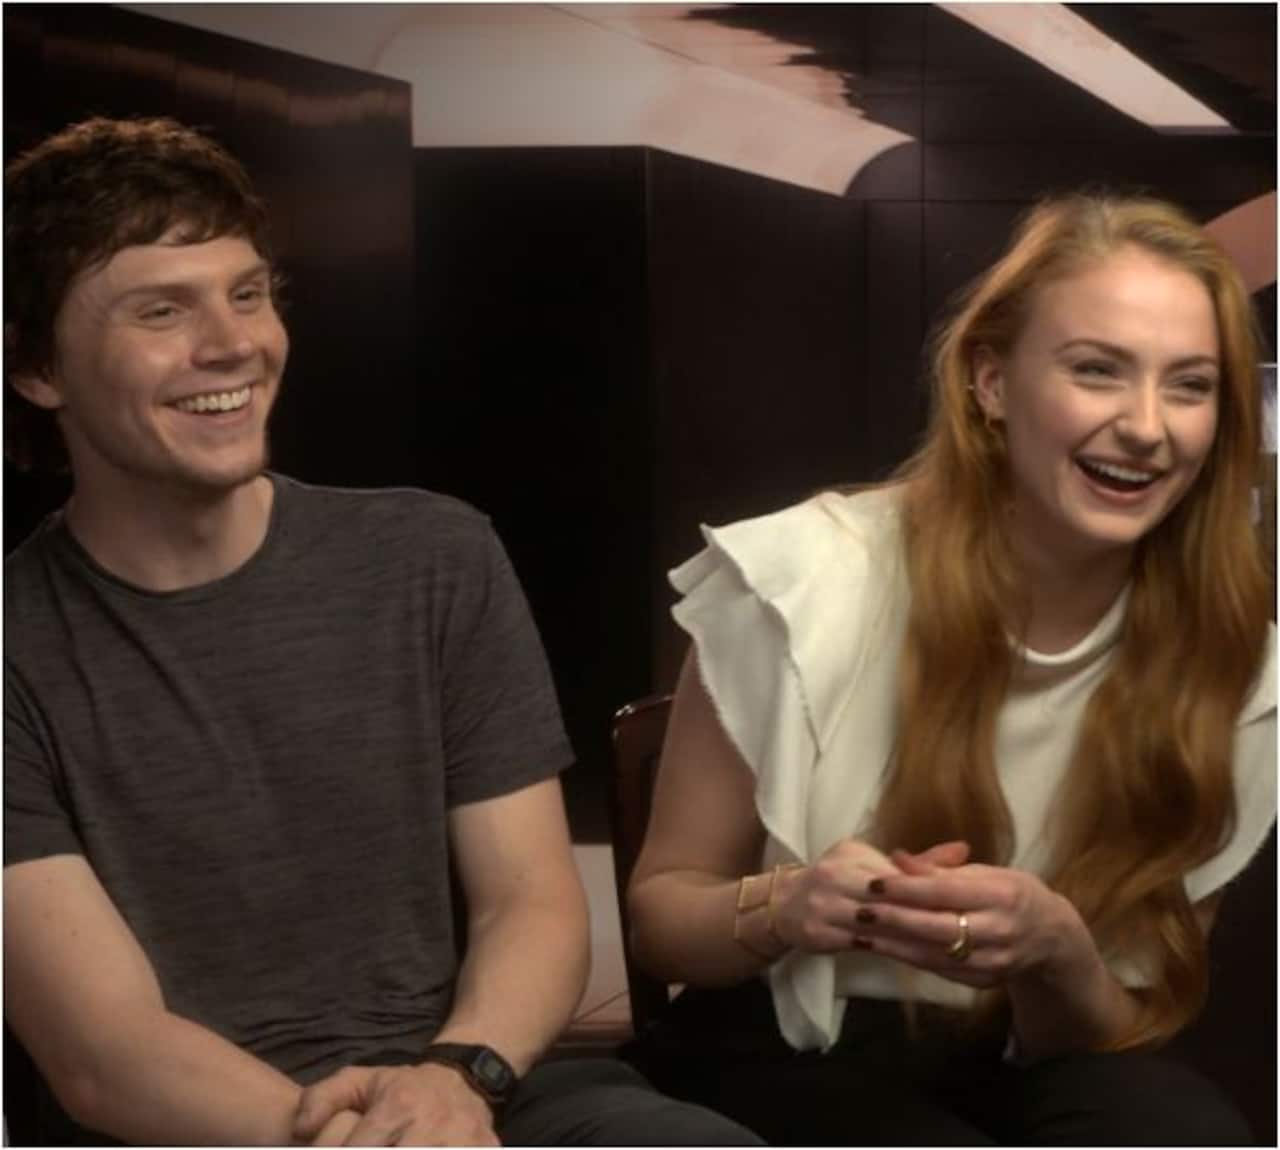 X-Men: Dark Phoenix stars Sophie Turner and Evan Peters reveal the prankster on sets and it's someone you'd never expect